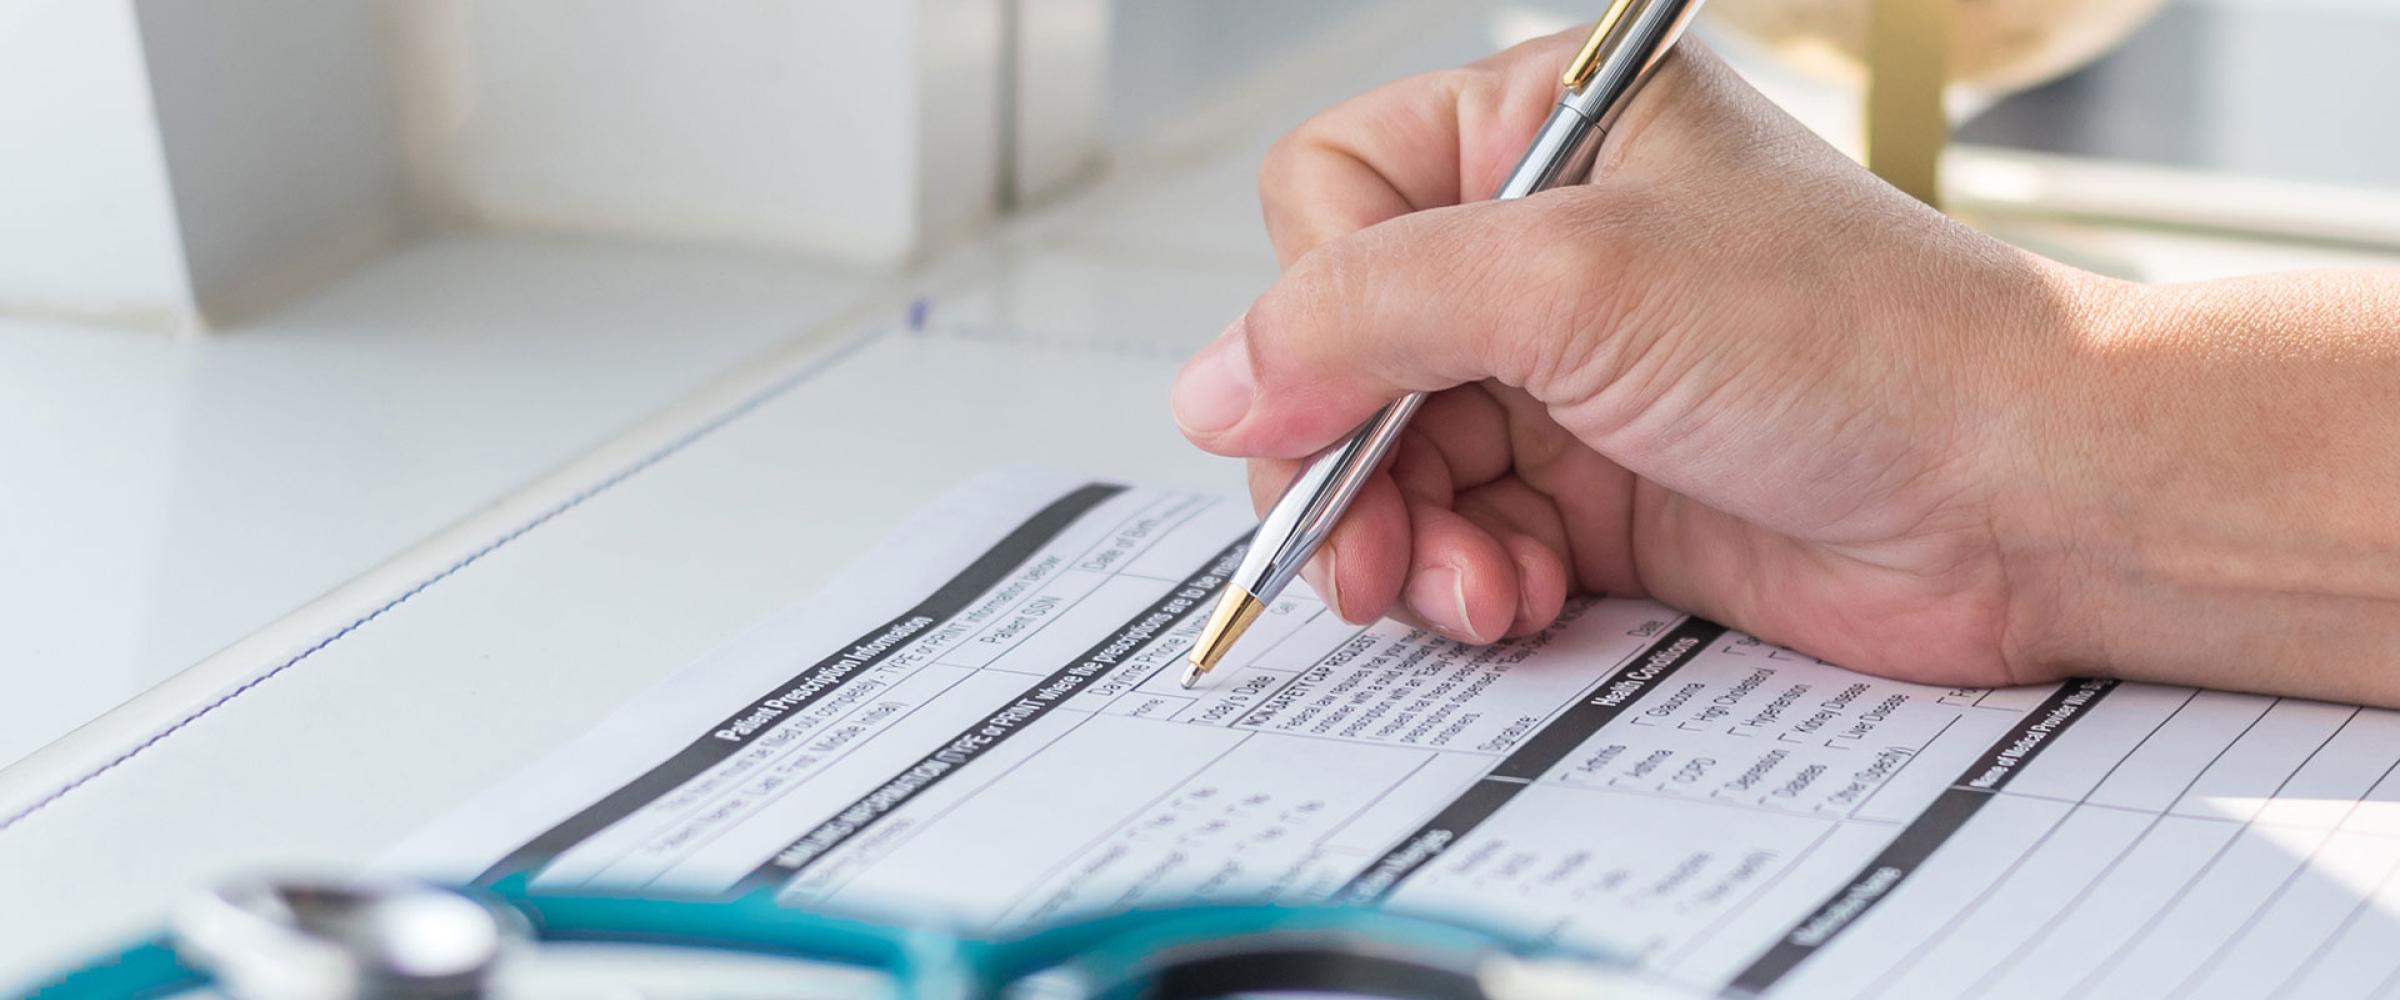 Doctor writing on medical health care record